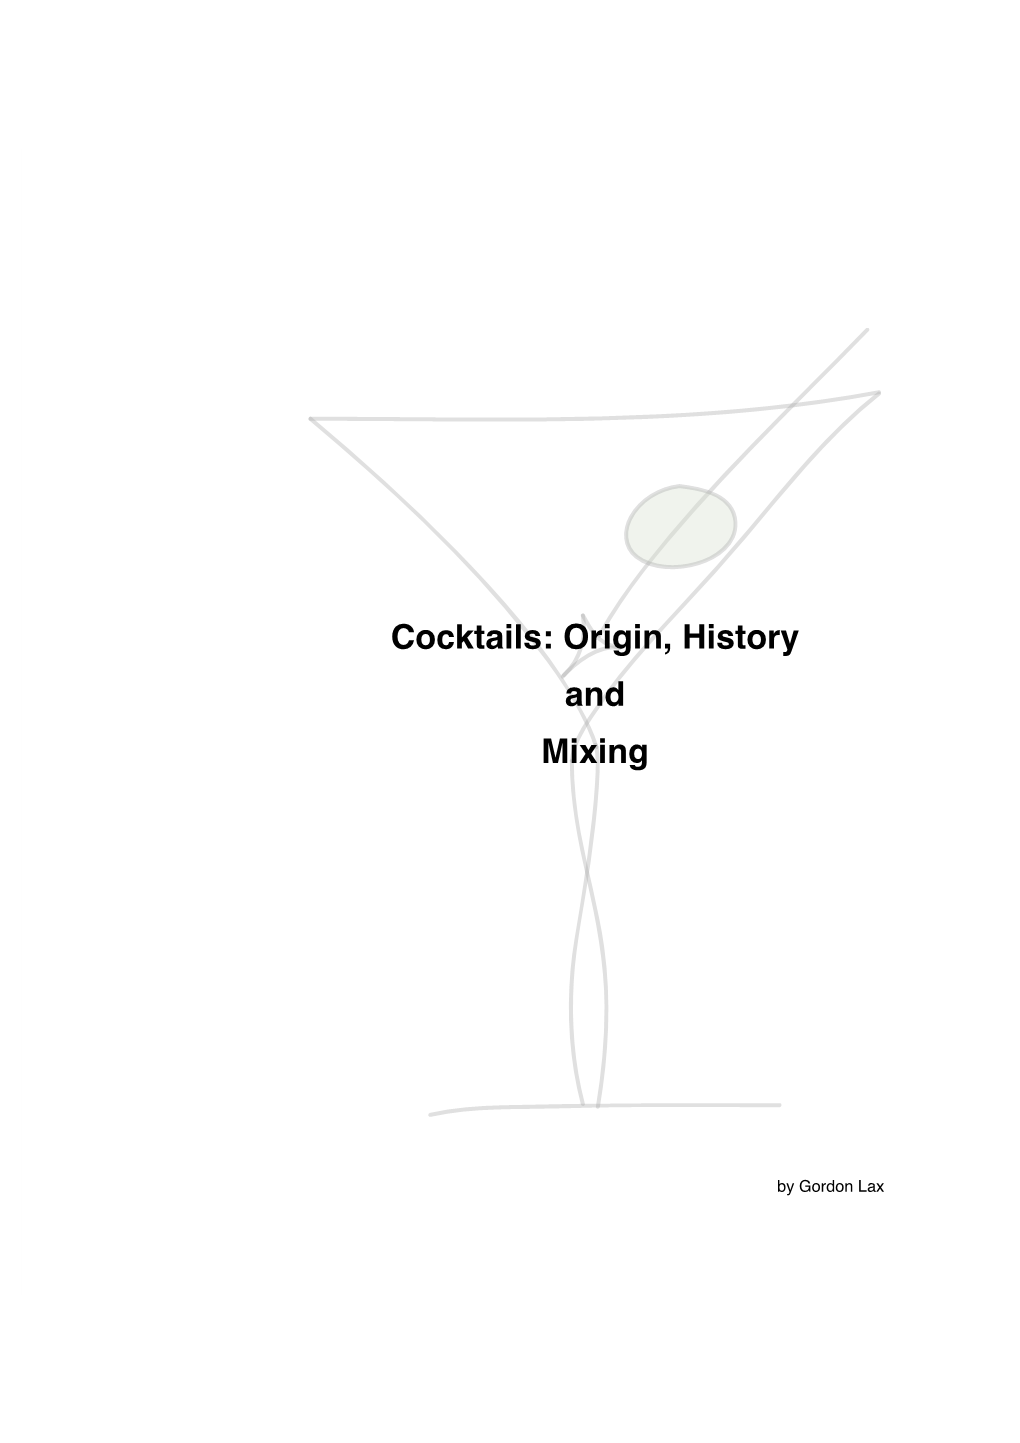 Cocktails: Origin, History and Mixing